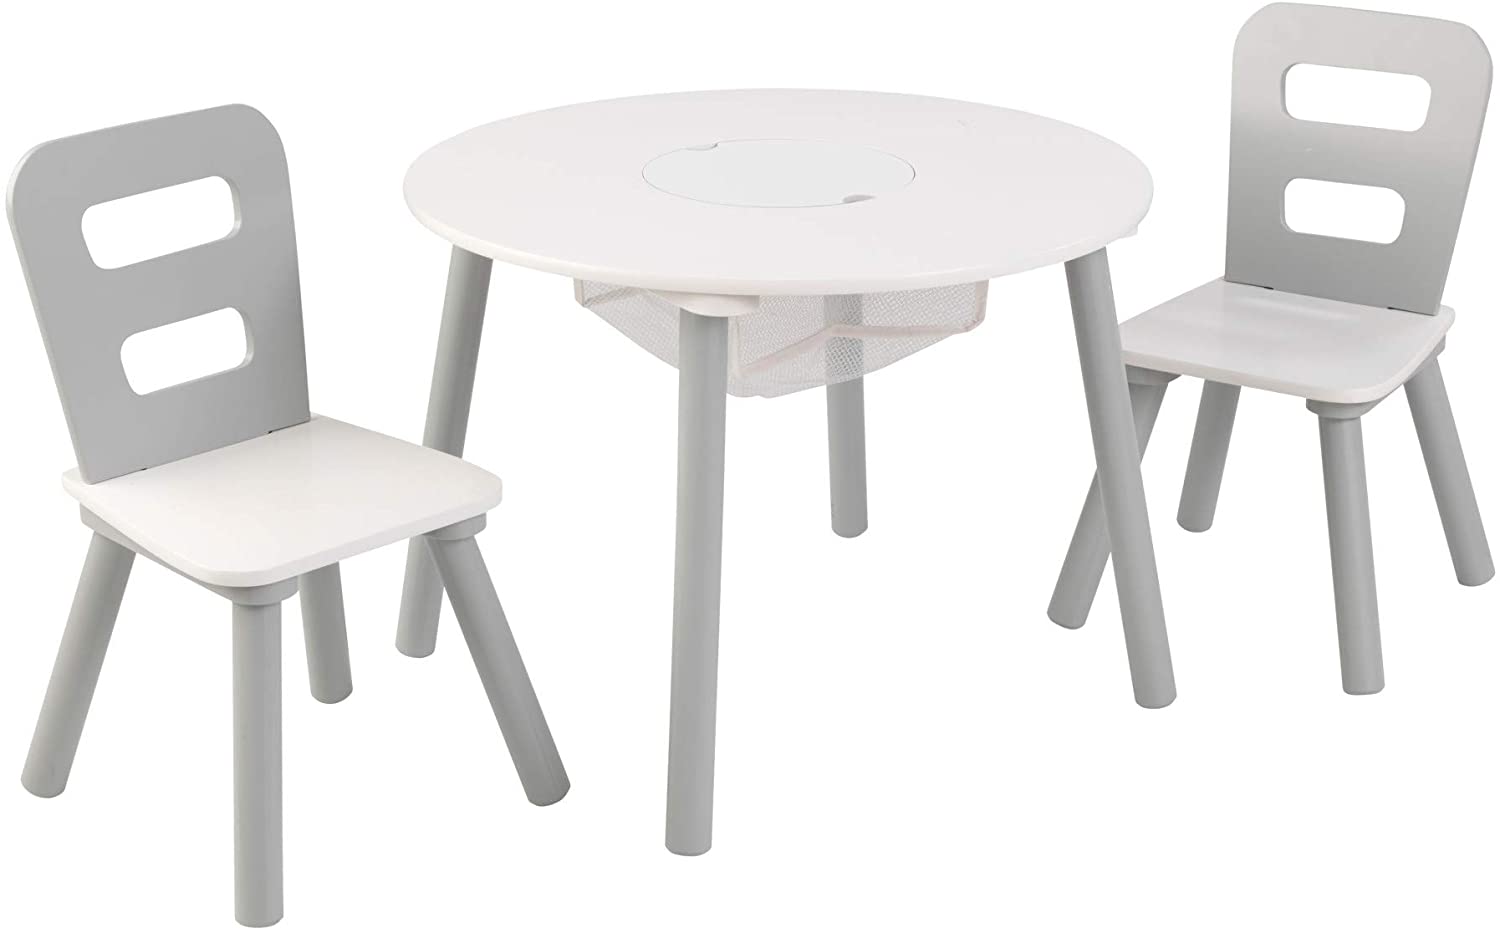 Round Table and 2 Chair Set for kids (Gray) - SILBERSHELL